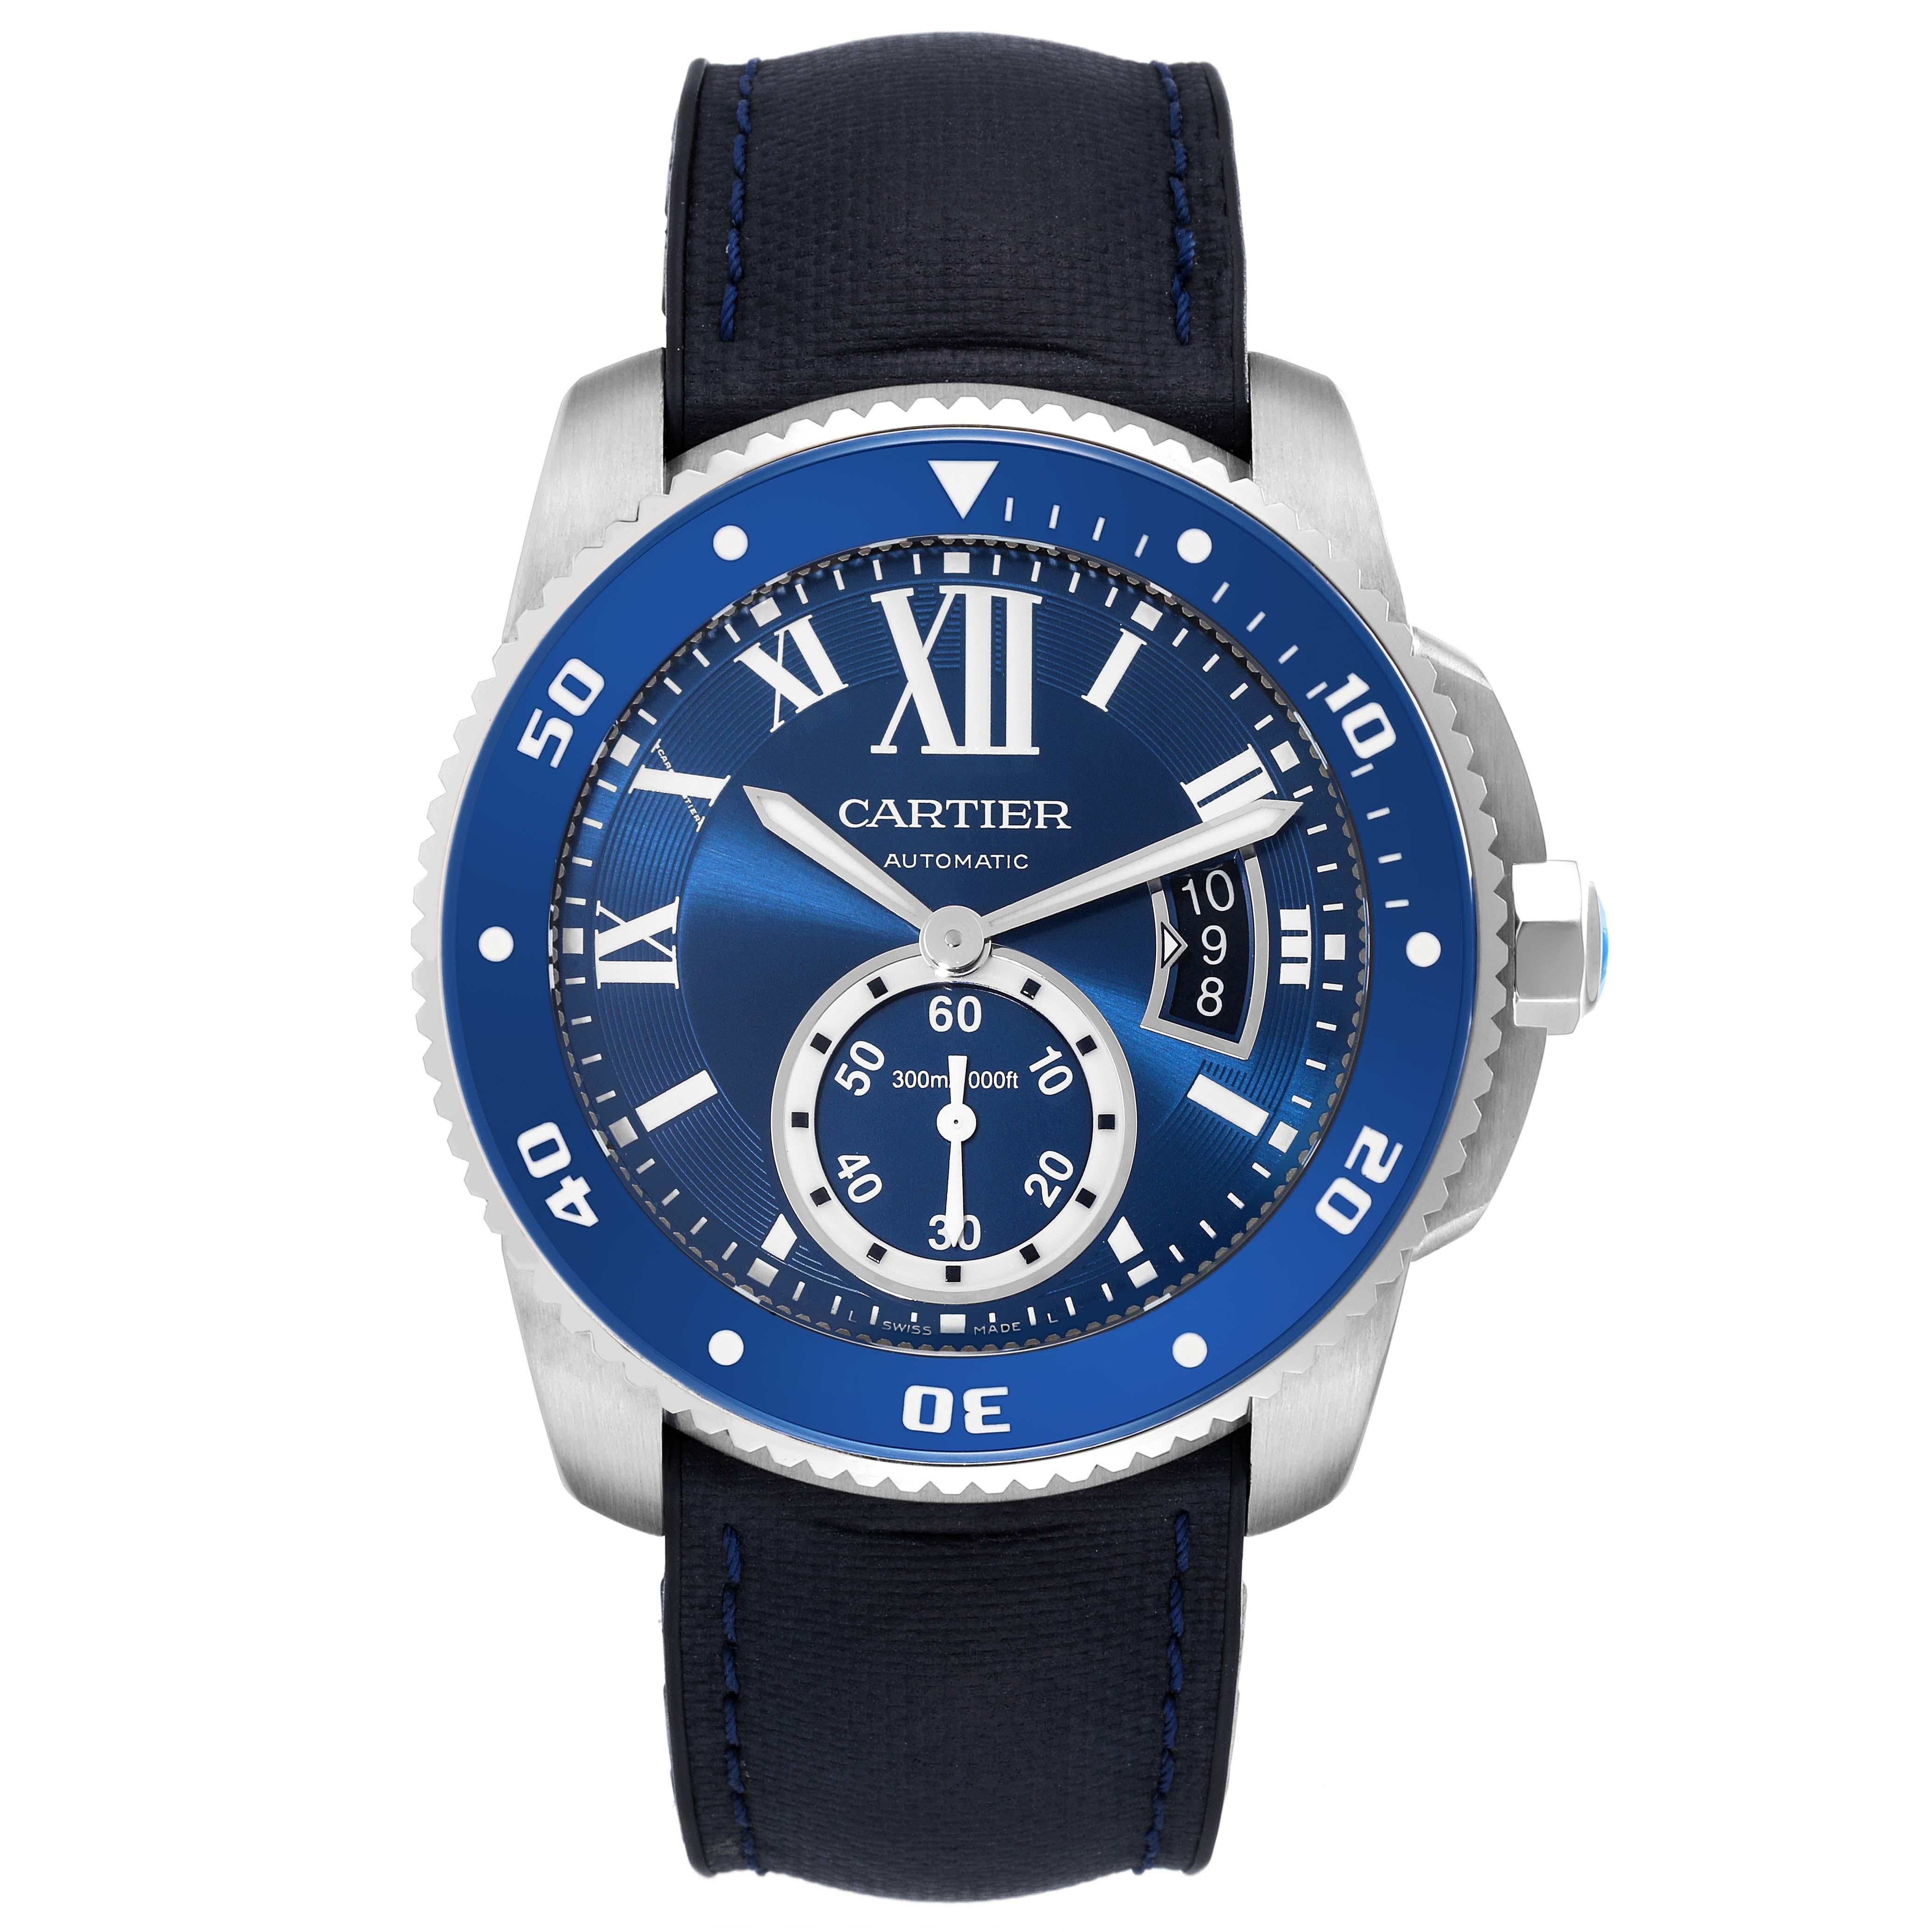 Cartier Calibre Diver Blue Dial Steel Mens Watch WSCA0010. Automatic self-winding movement. Stainless steel round case 42.0 mm in diameter. Crown set with faceted blue spinel. Case thickness: 11 mm. Blue ADLC-coated stainless steel unidirectional